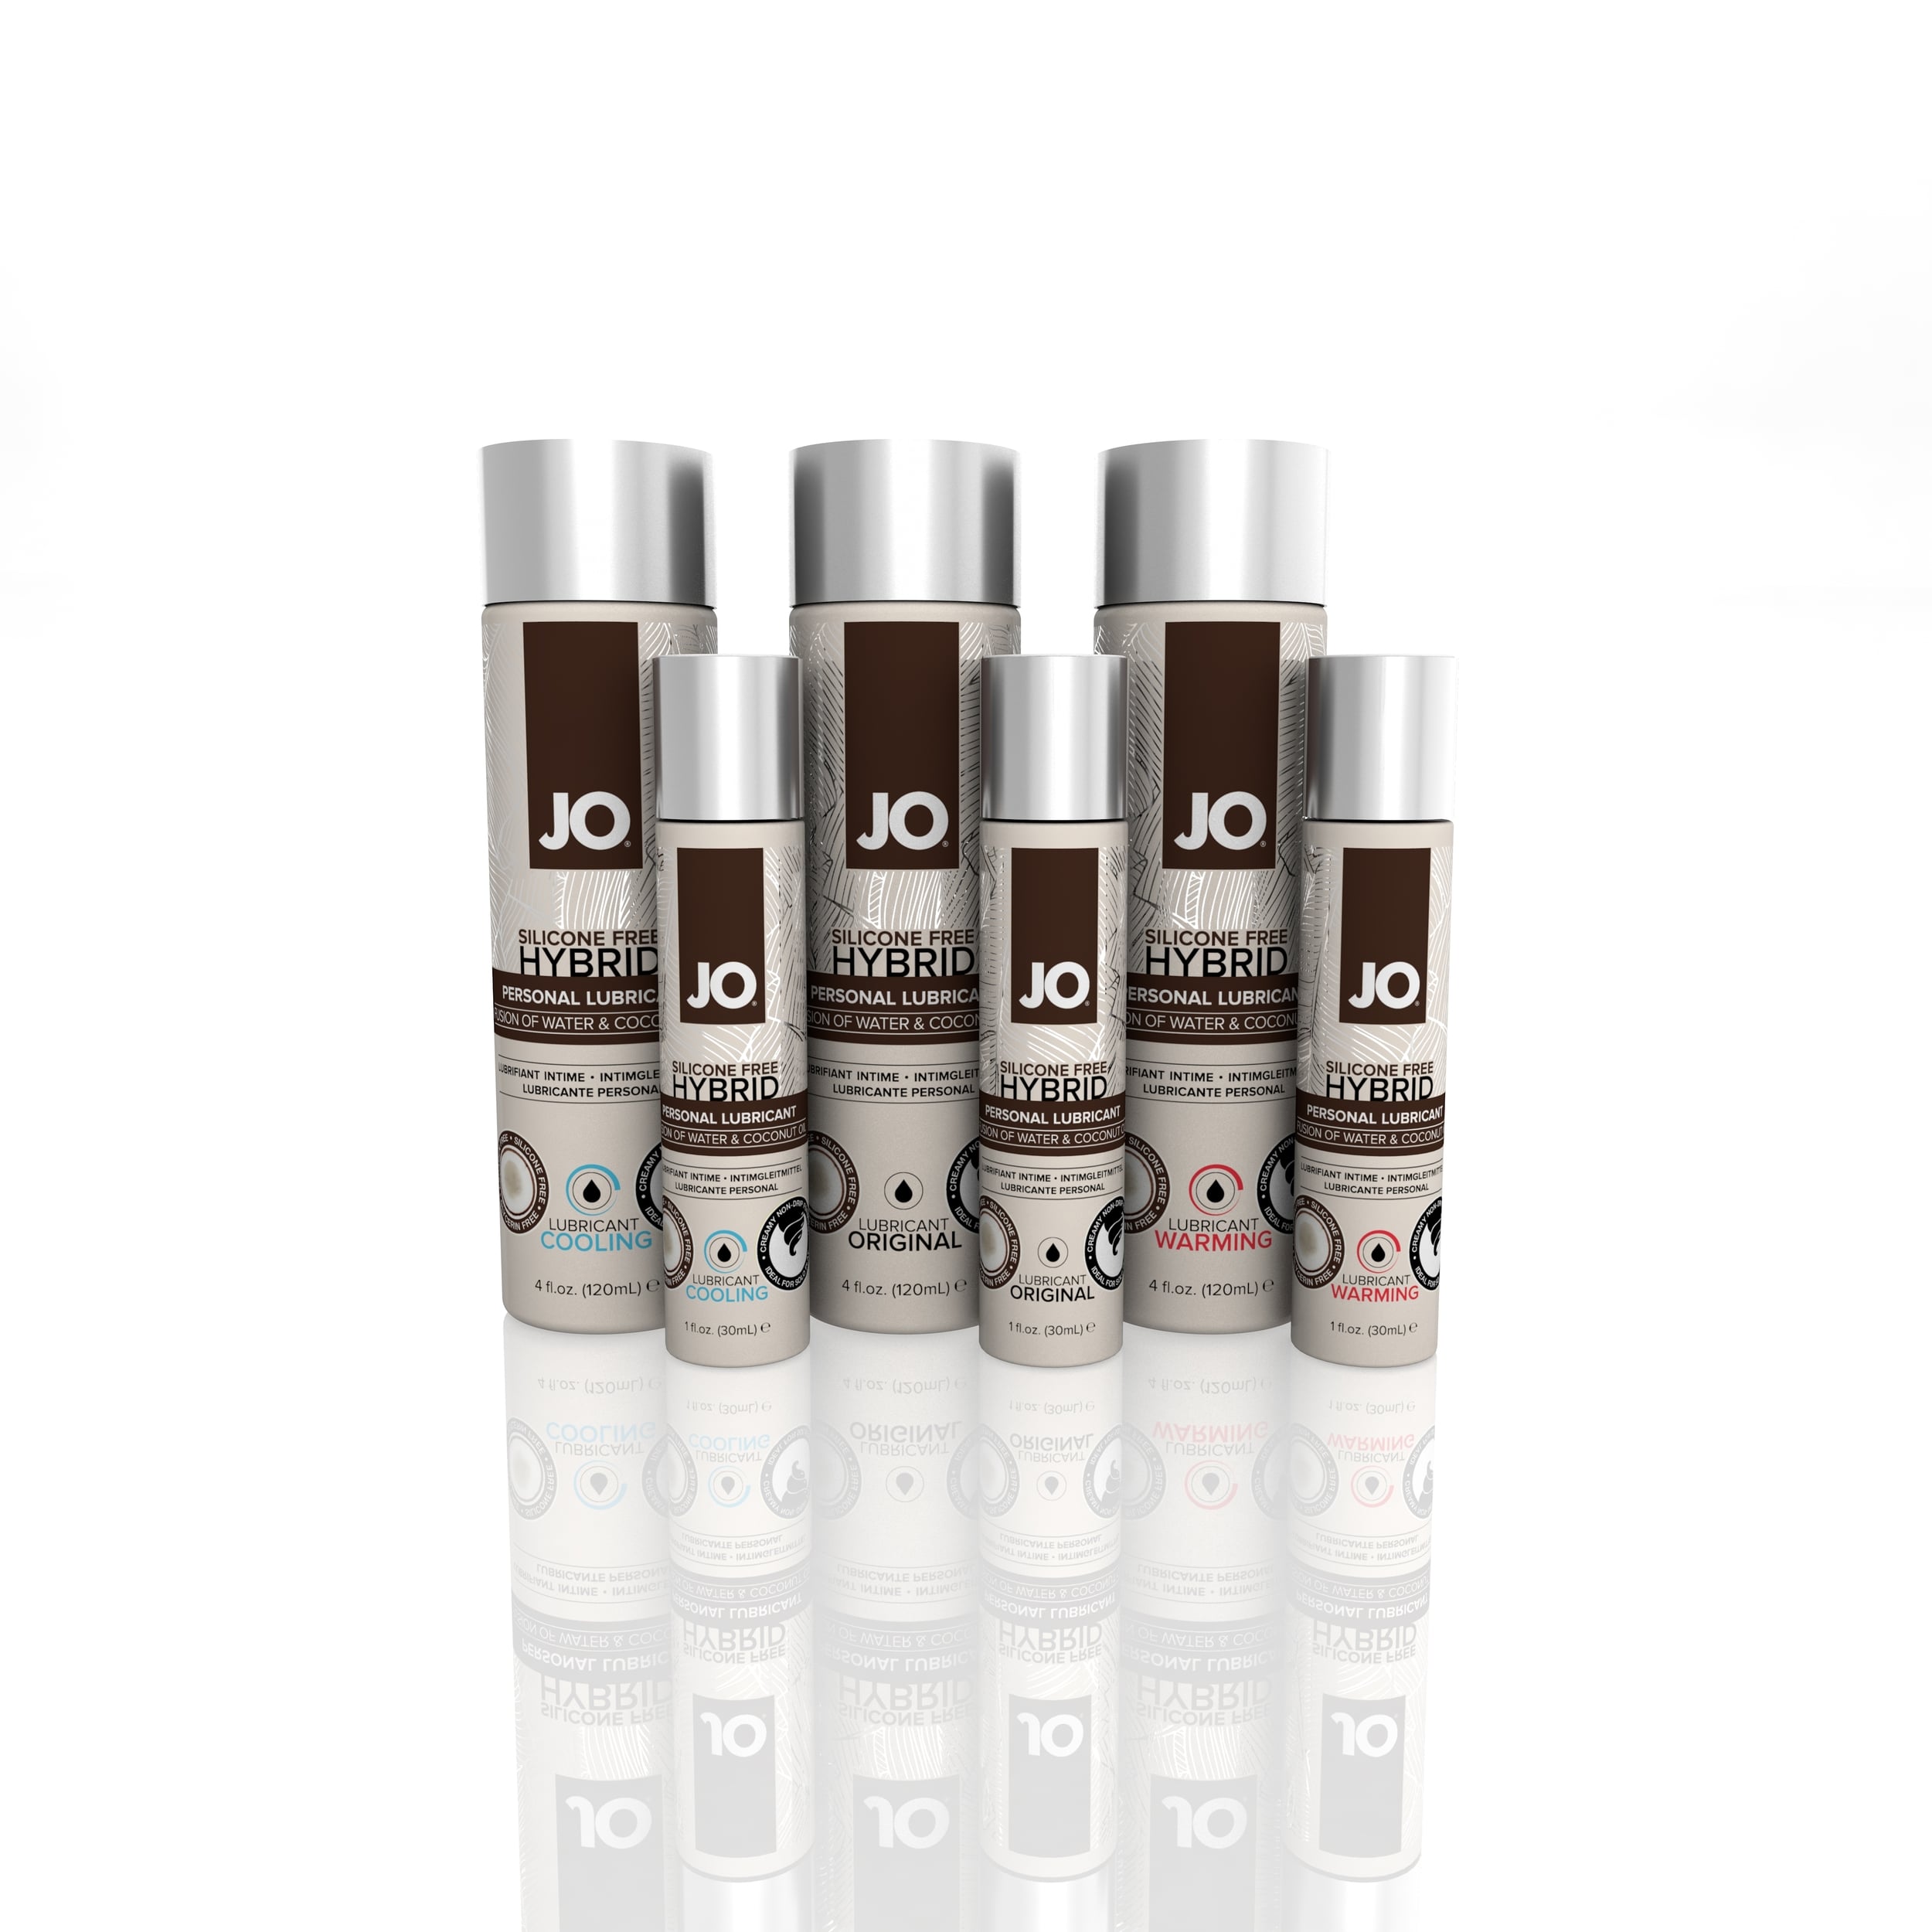 JO Silicone Free Hybrid Lubricant Collection.jpg